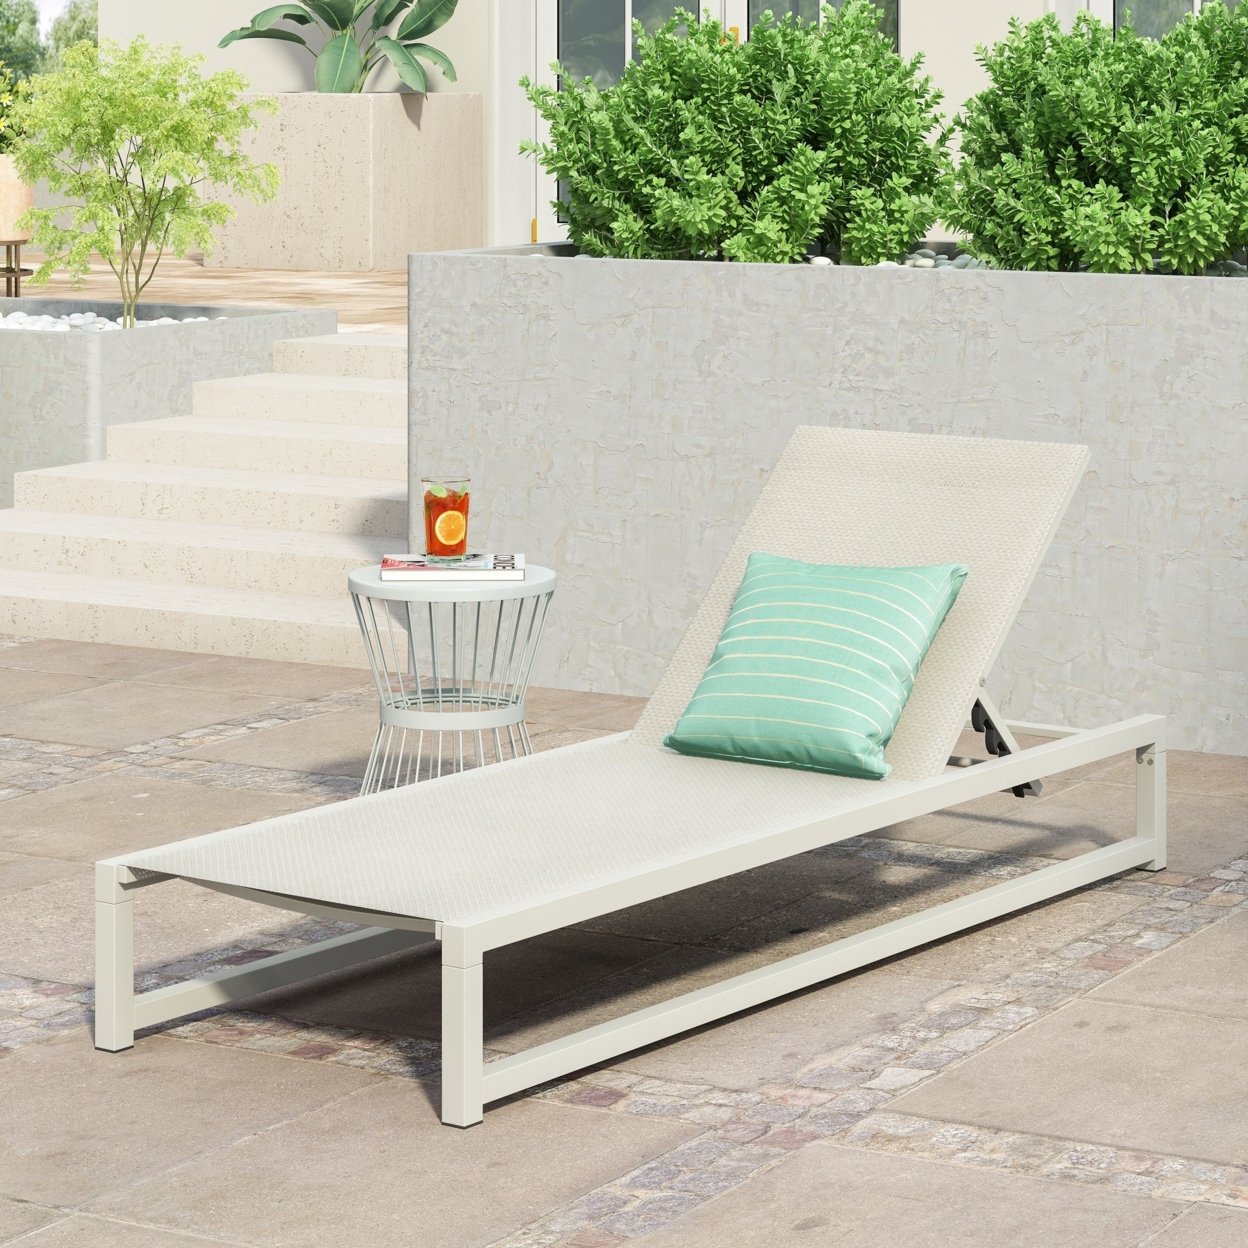 Moderna Outdoor Aluminum Chaise Lounge With Mesh Seating - White